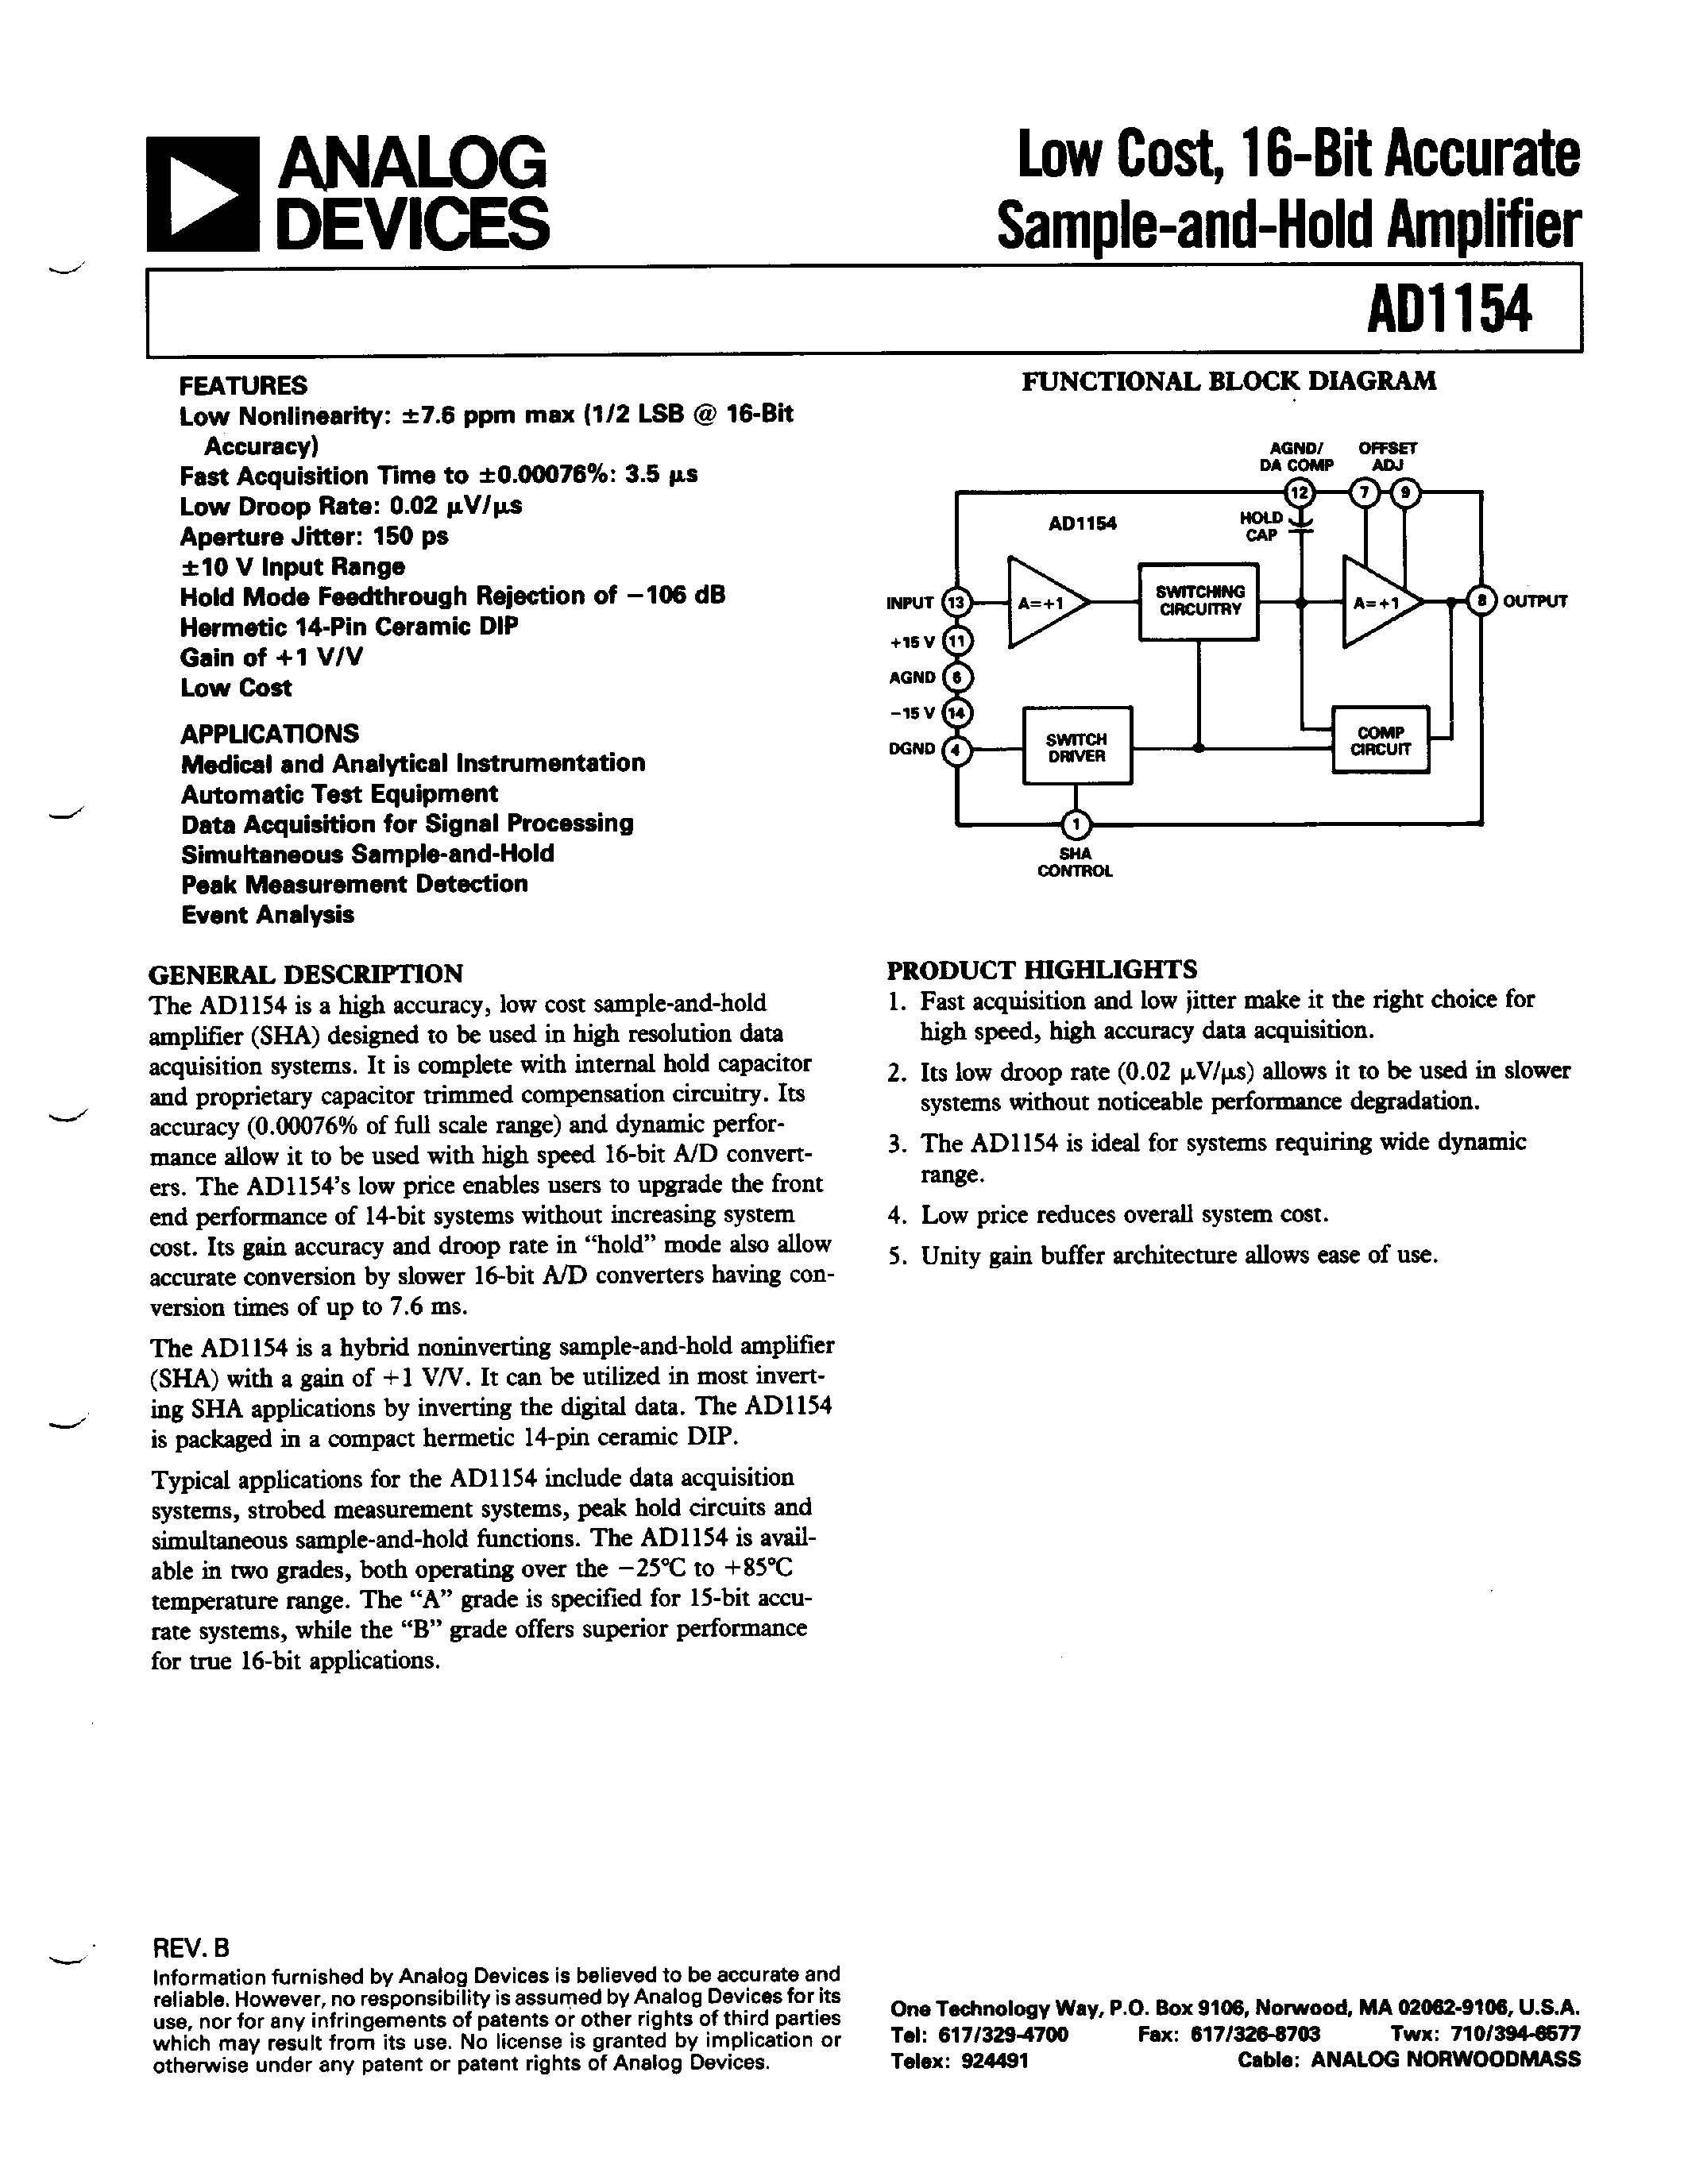 Datasheet AD1154 - Low Cost/ 16-Bit Accurate Sample-and-Hold Amplifier page 1